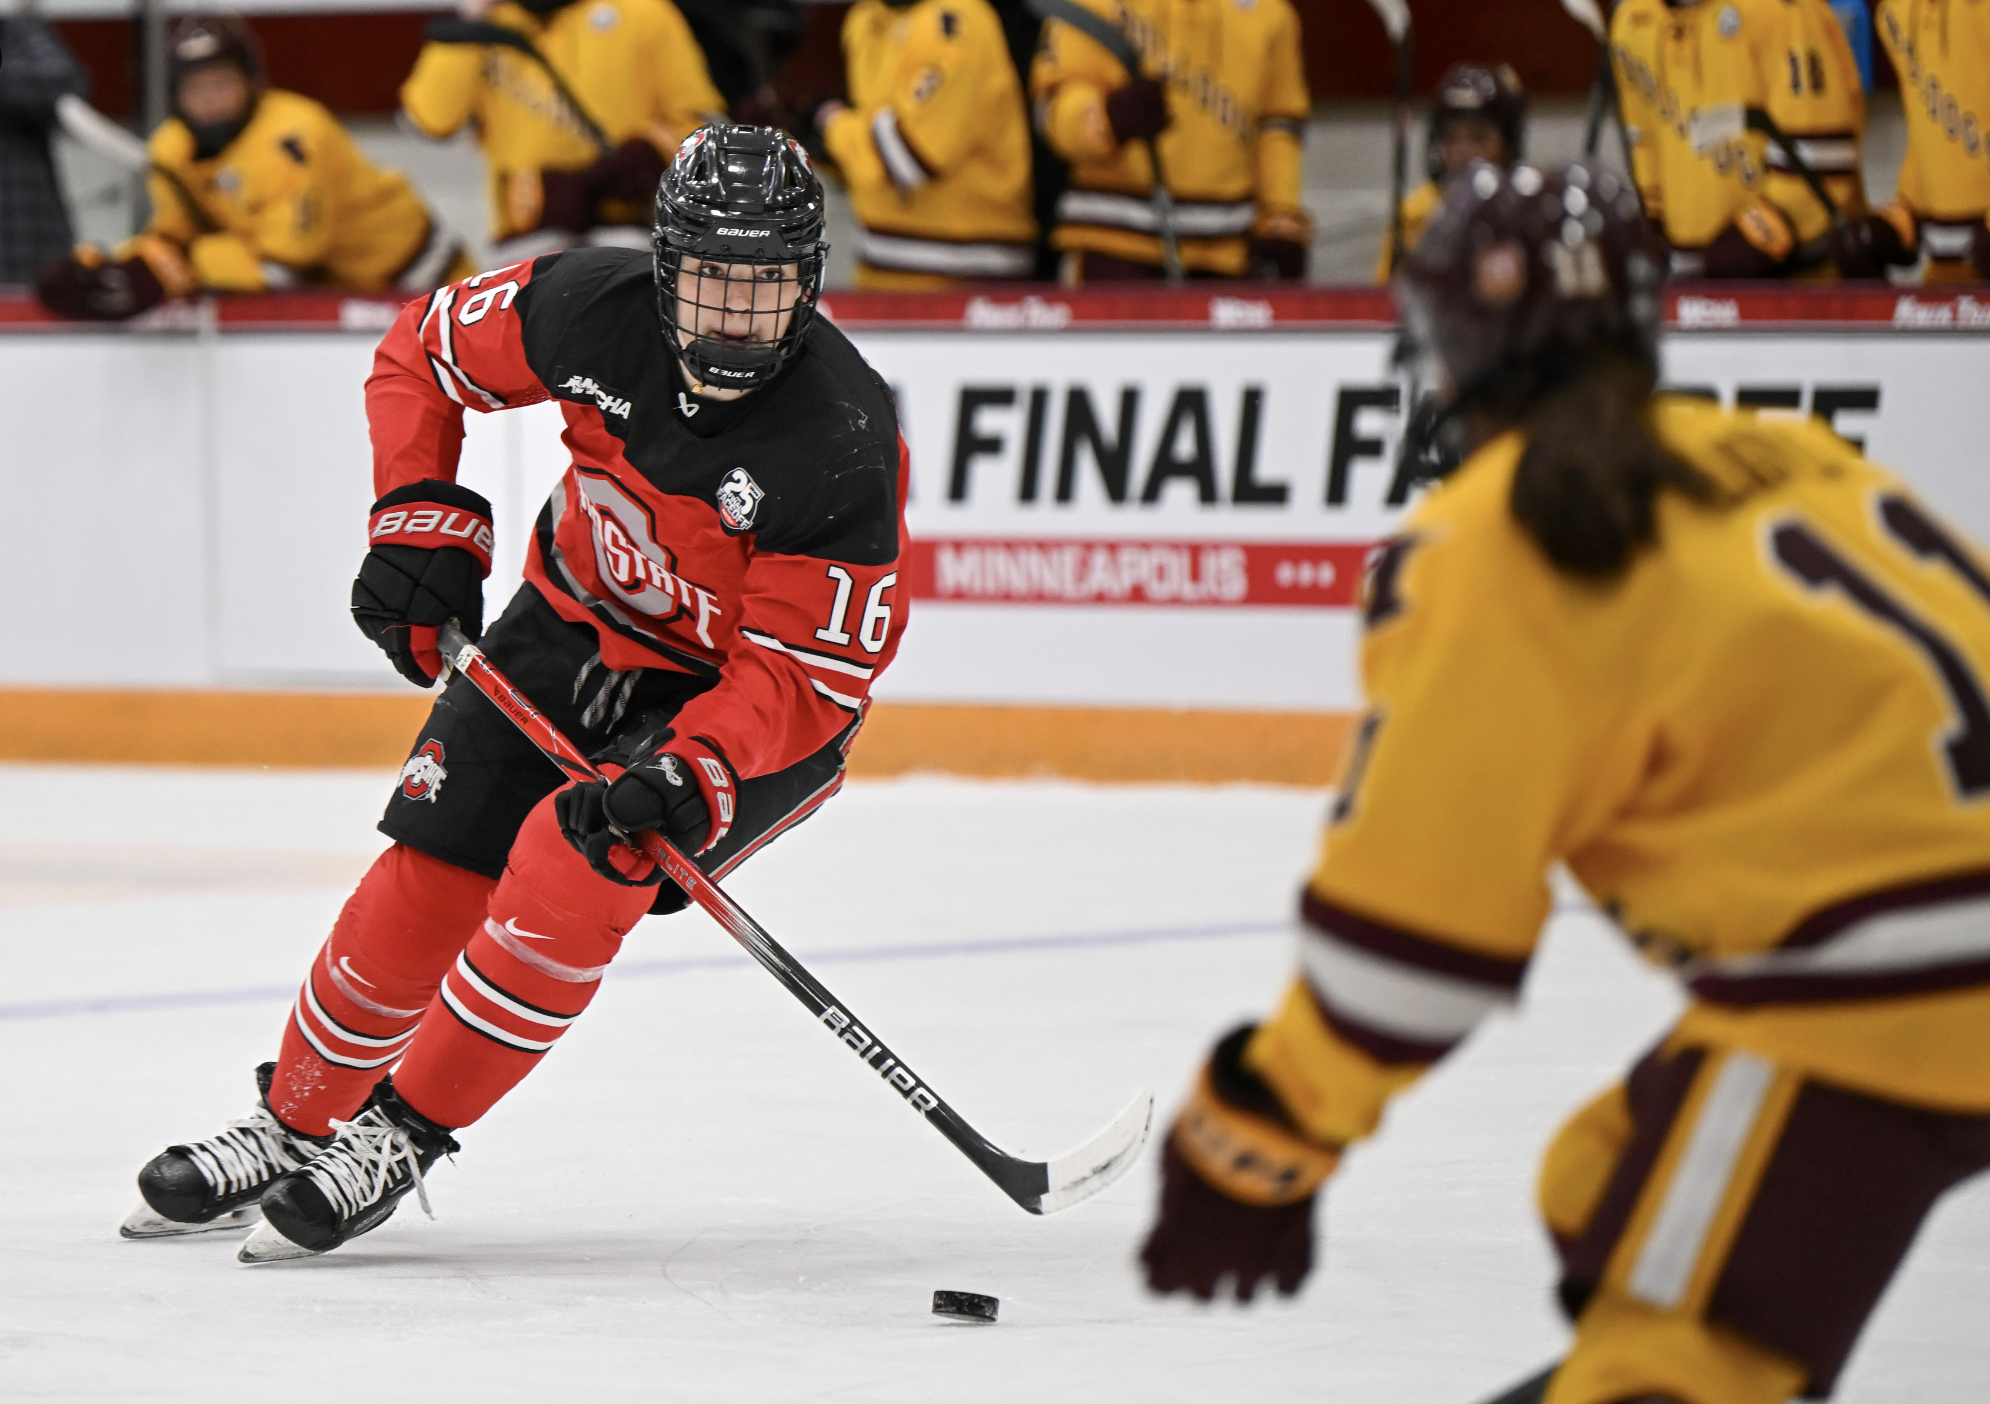 Joy Dunne skates with the puck. She is hunched over amd looking up at a defender, who is blurry in the shot. Dunne is wearing a red and black OSU uniform.